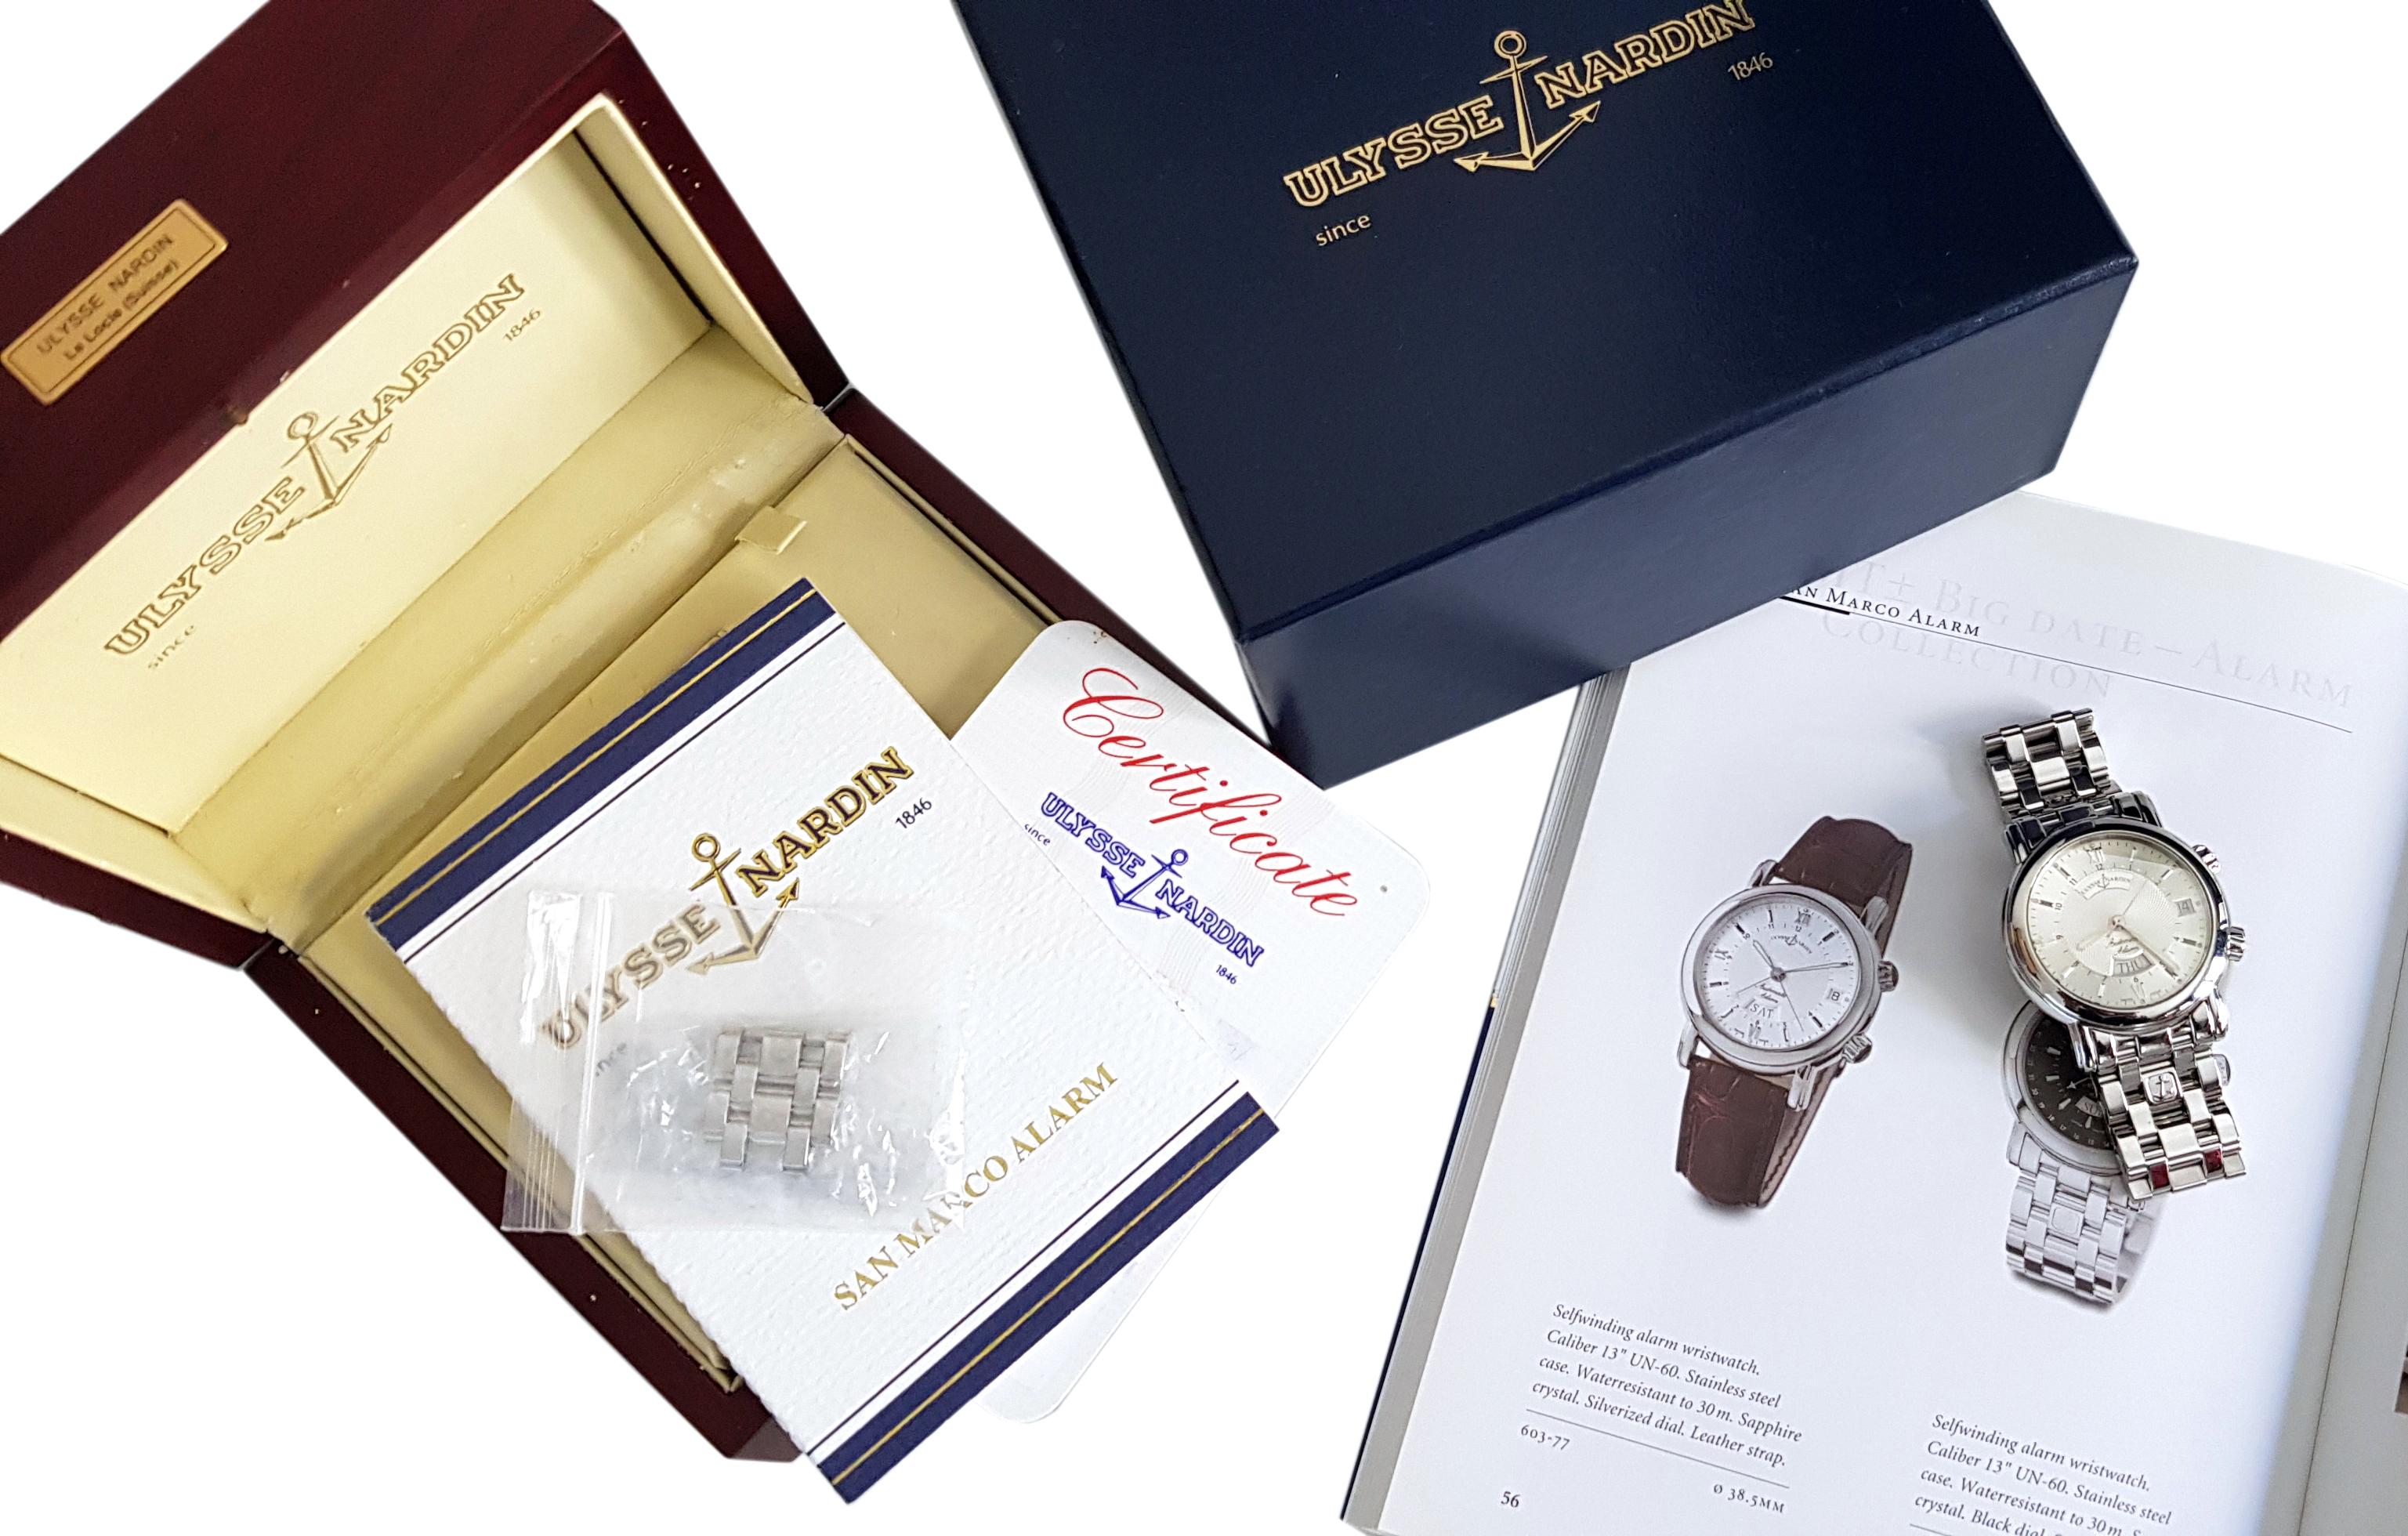 Ulysse Nardin
Founded in 1846
For the discerning few

Ulysse Nardin is the pioneering Manufacture inspired by the sea and delivering innovative timepieces to free spirits.

Founded by Mr. Ulysse Nardin in 1846, Ulysse Nardin has written some of the